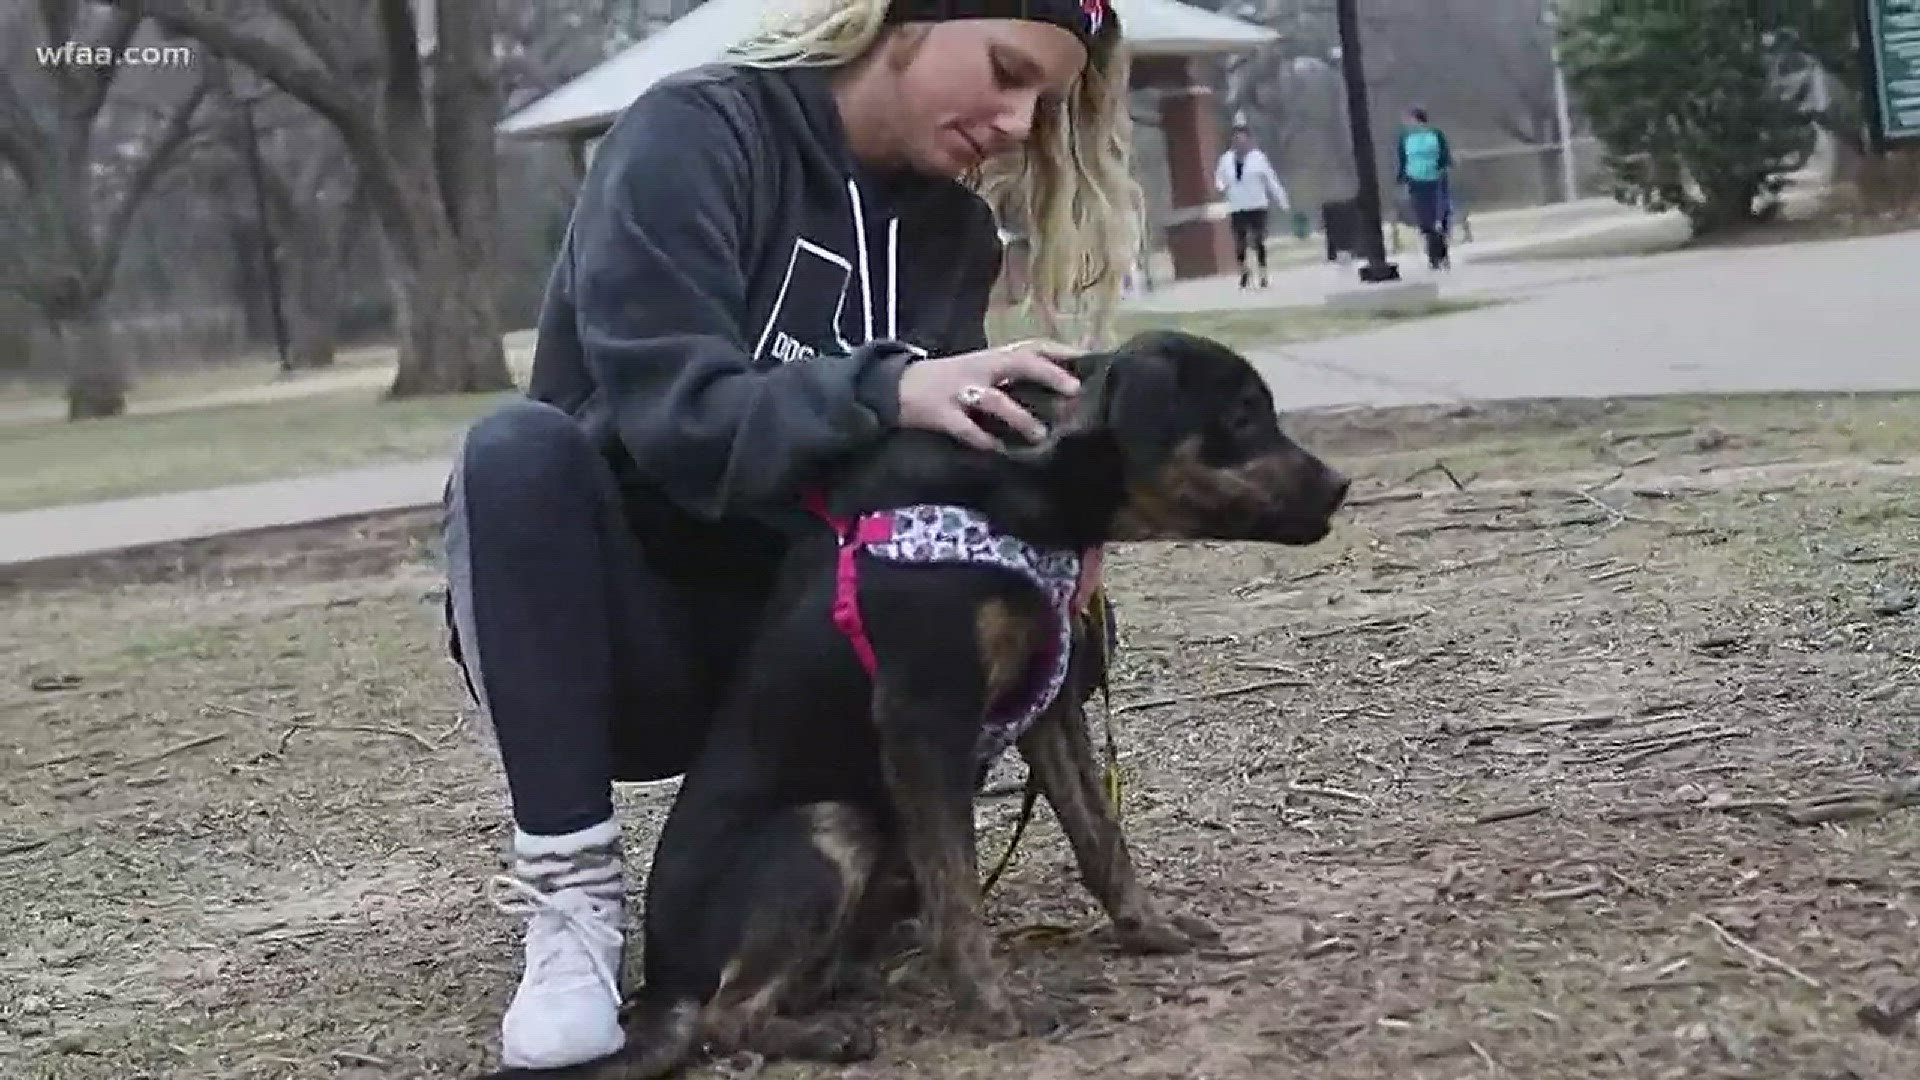 Working out program allows you to workout with shelter dogs